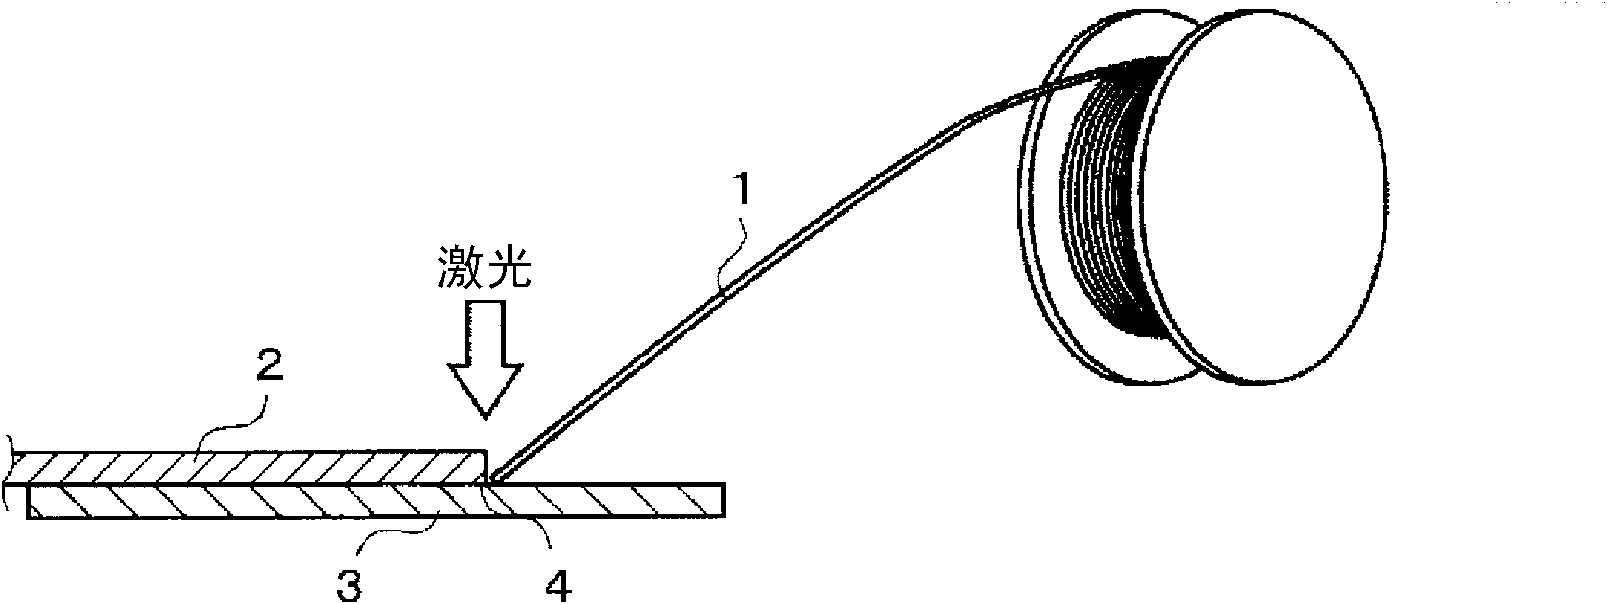 Flux-cored wire for welding different materials, method for laser welding of different materials, and method for MIG welding of different materials